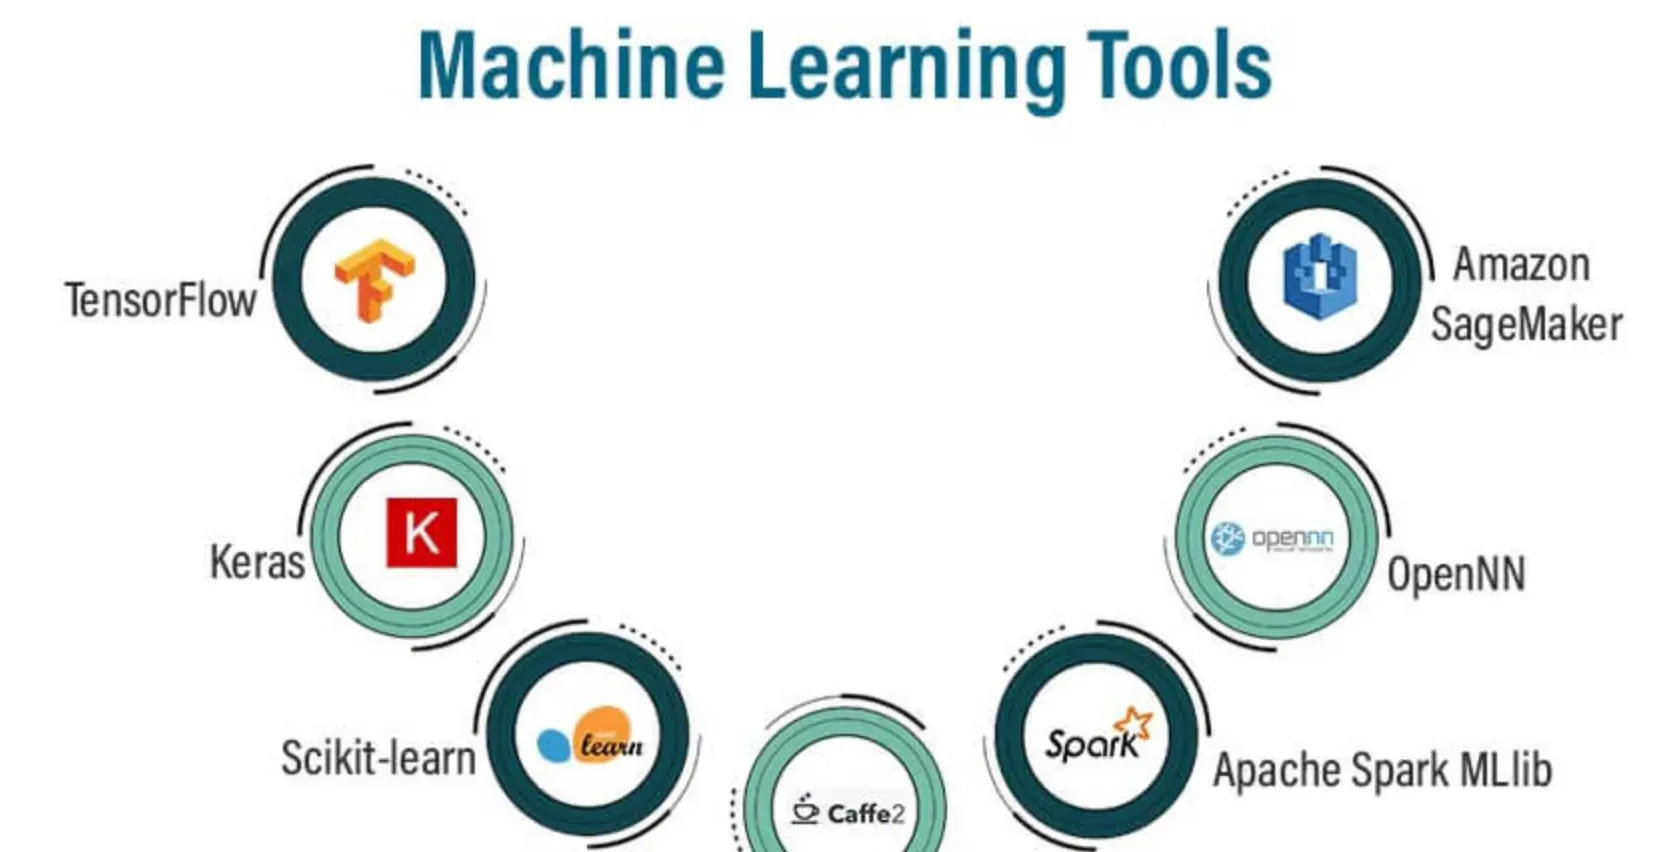 Machine Learning Tools?